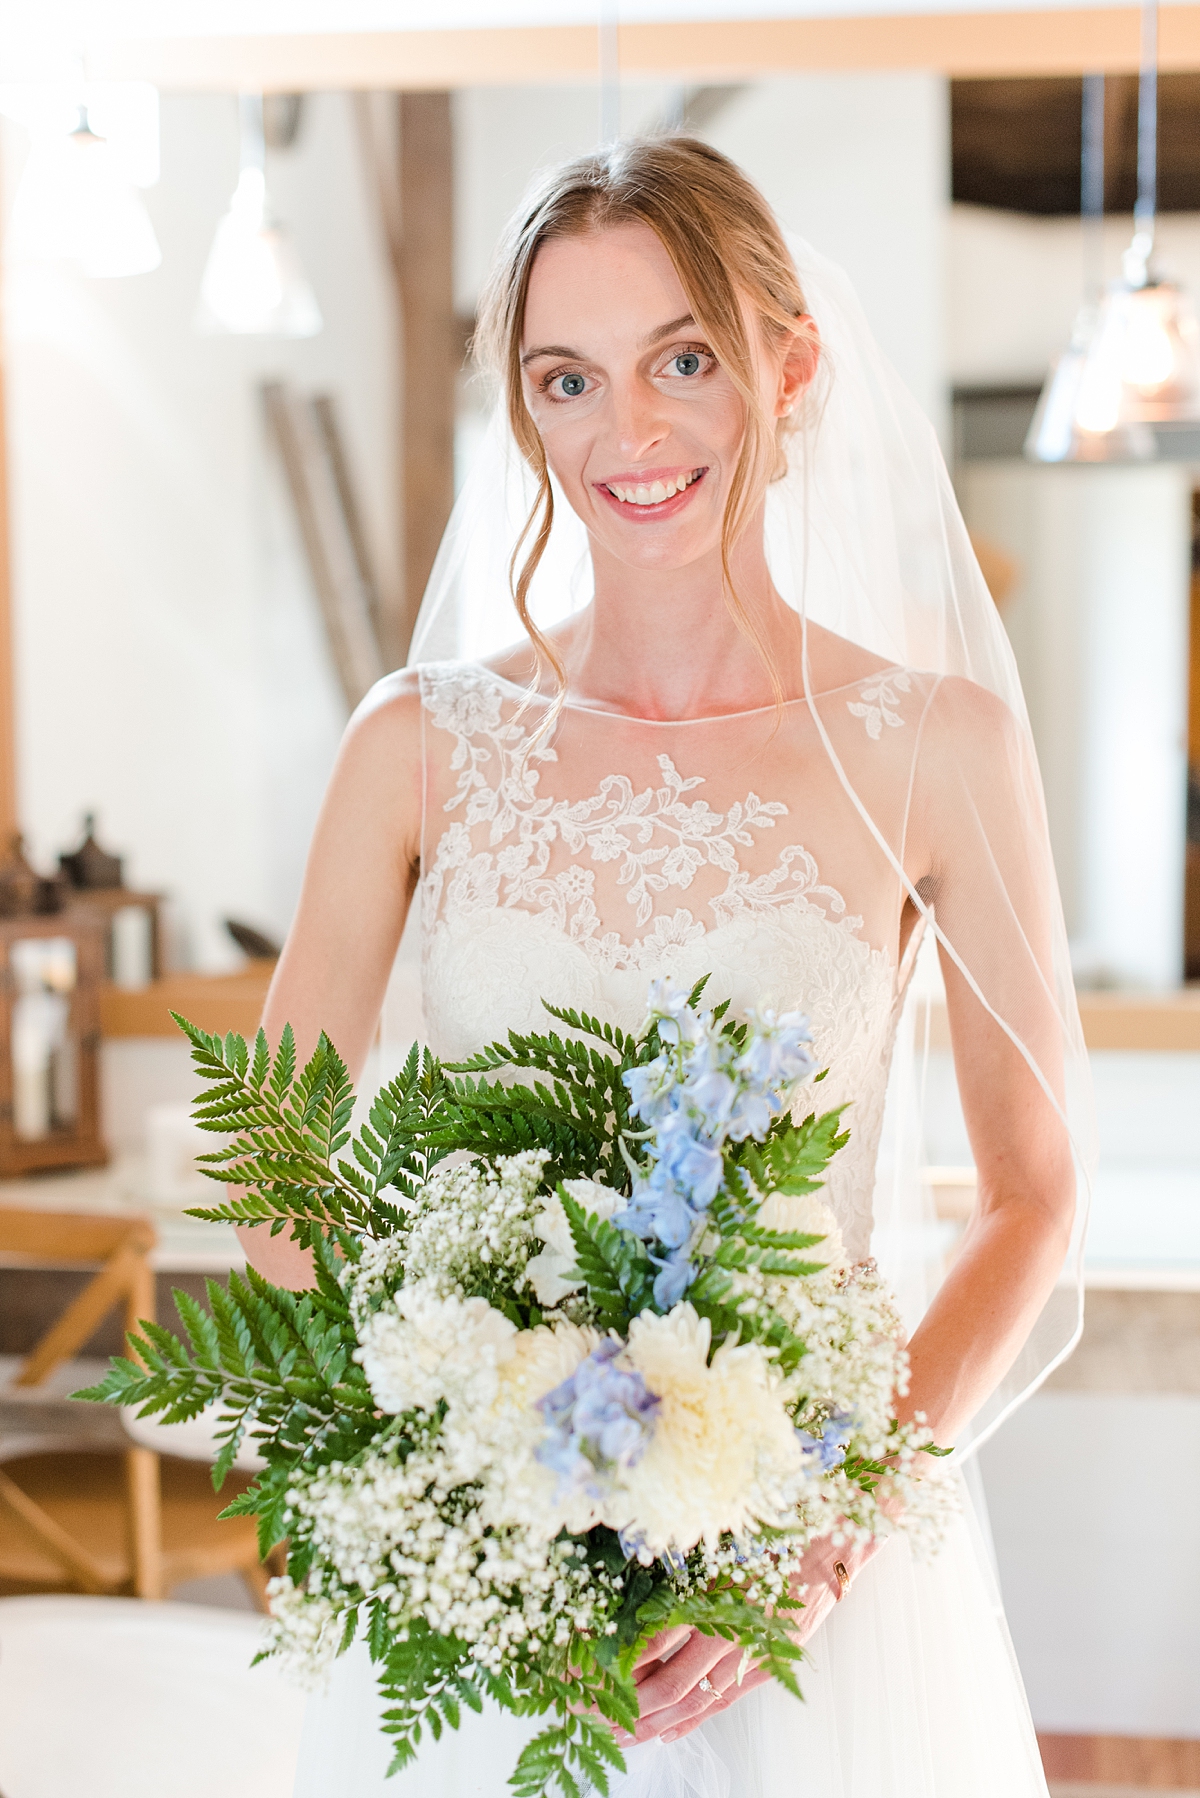 Bridal Portraits at Granary at Valley Pike Rustic Wedding. Wedding Photography by Richmond Wedding Photographer Kailey Brianne Photography. 